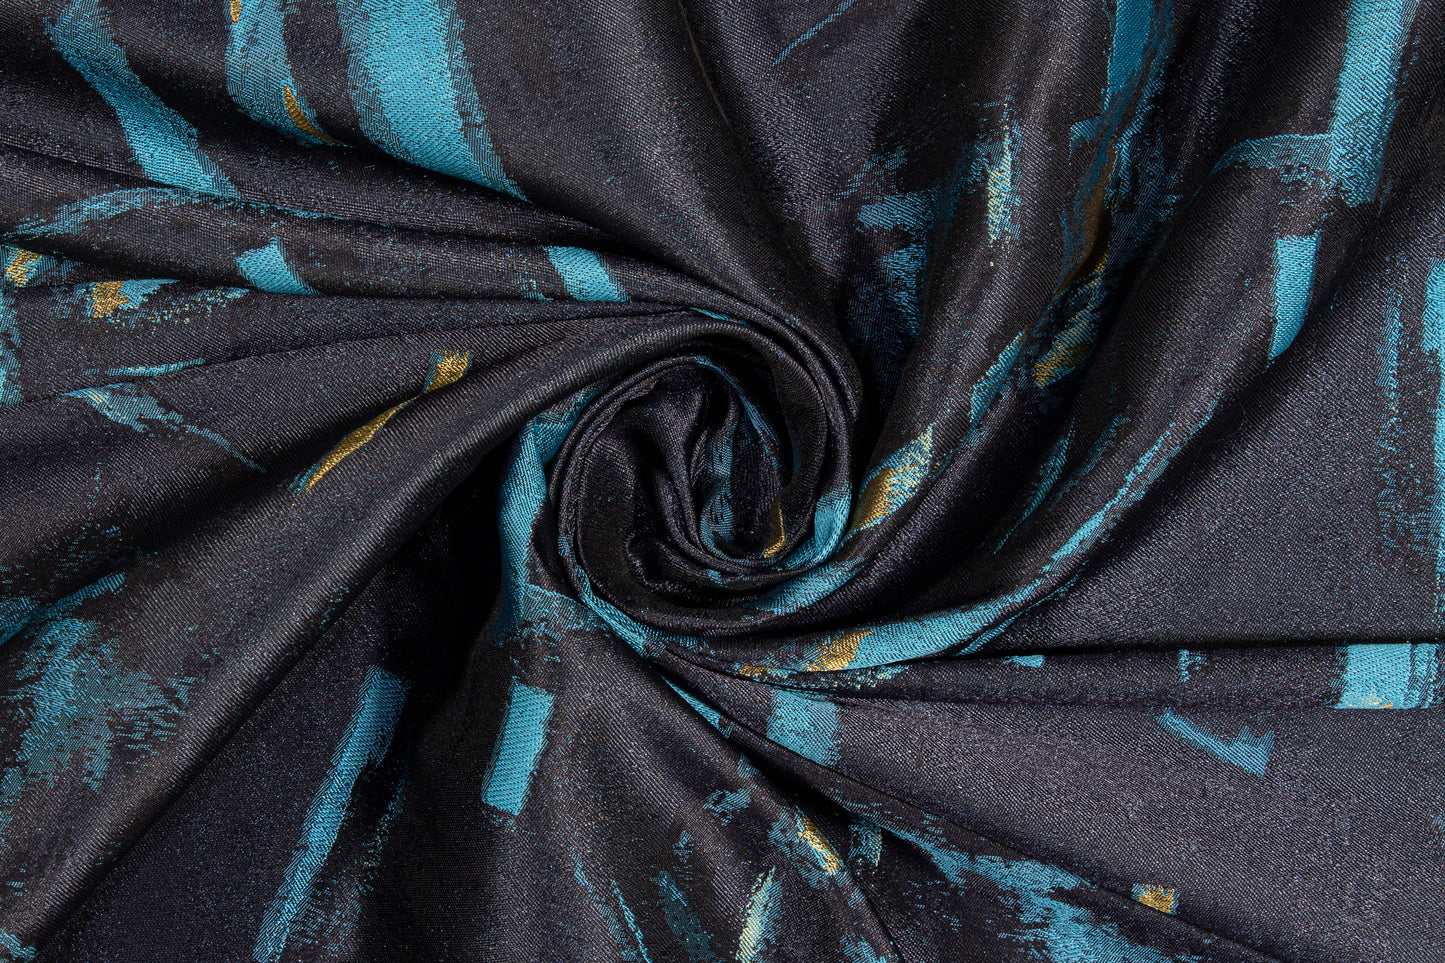 Abstract Metallic Brocade - Blue and Gold